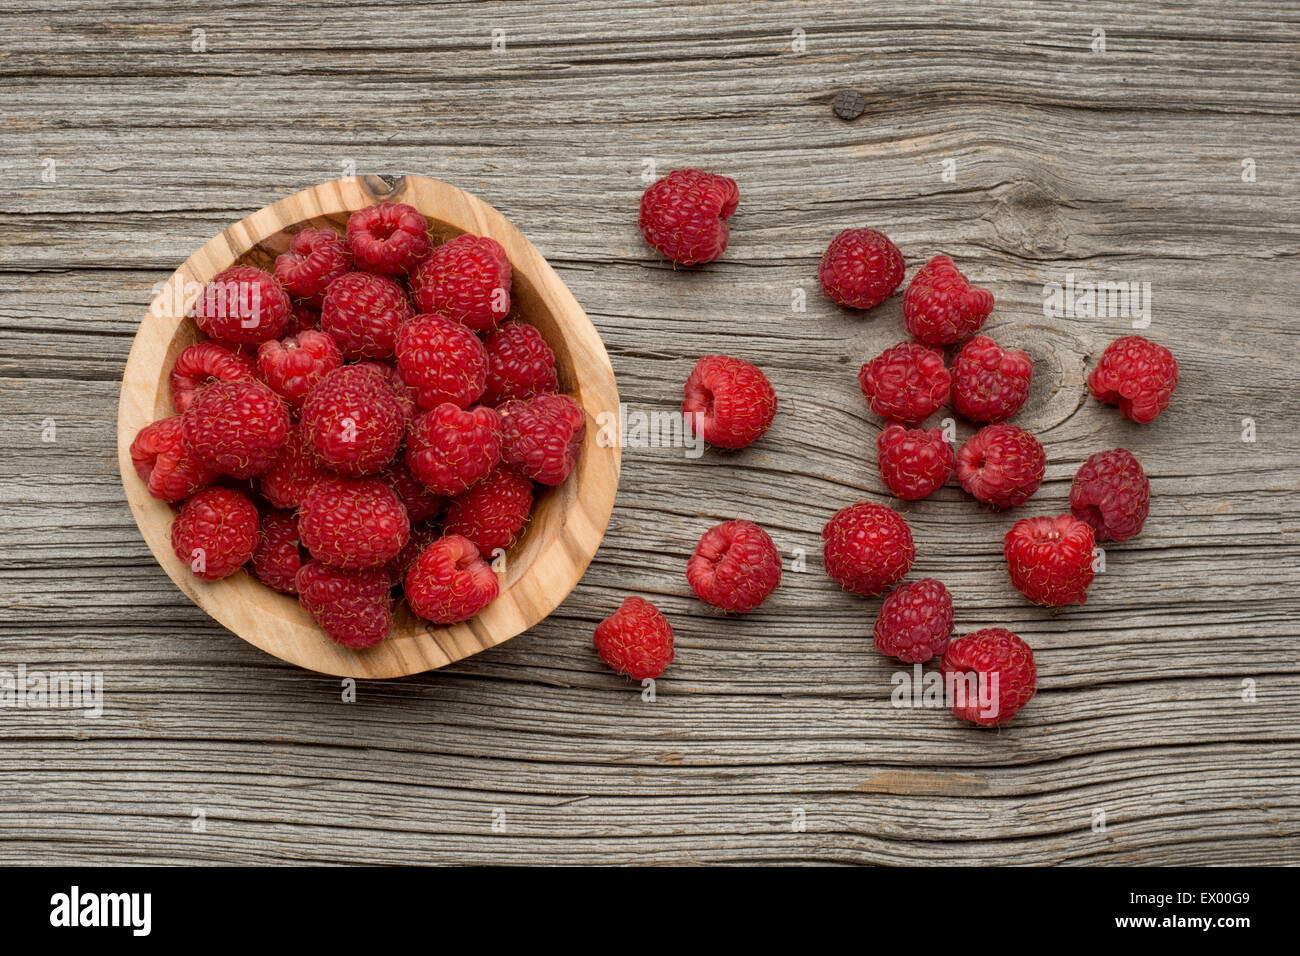 Raspberries in olive wood bowl on old wooden background Stock Photo